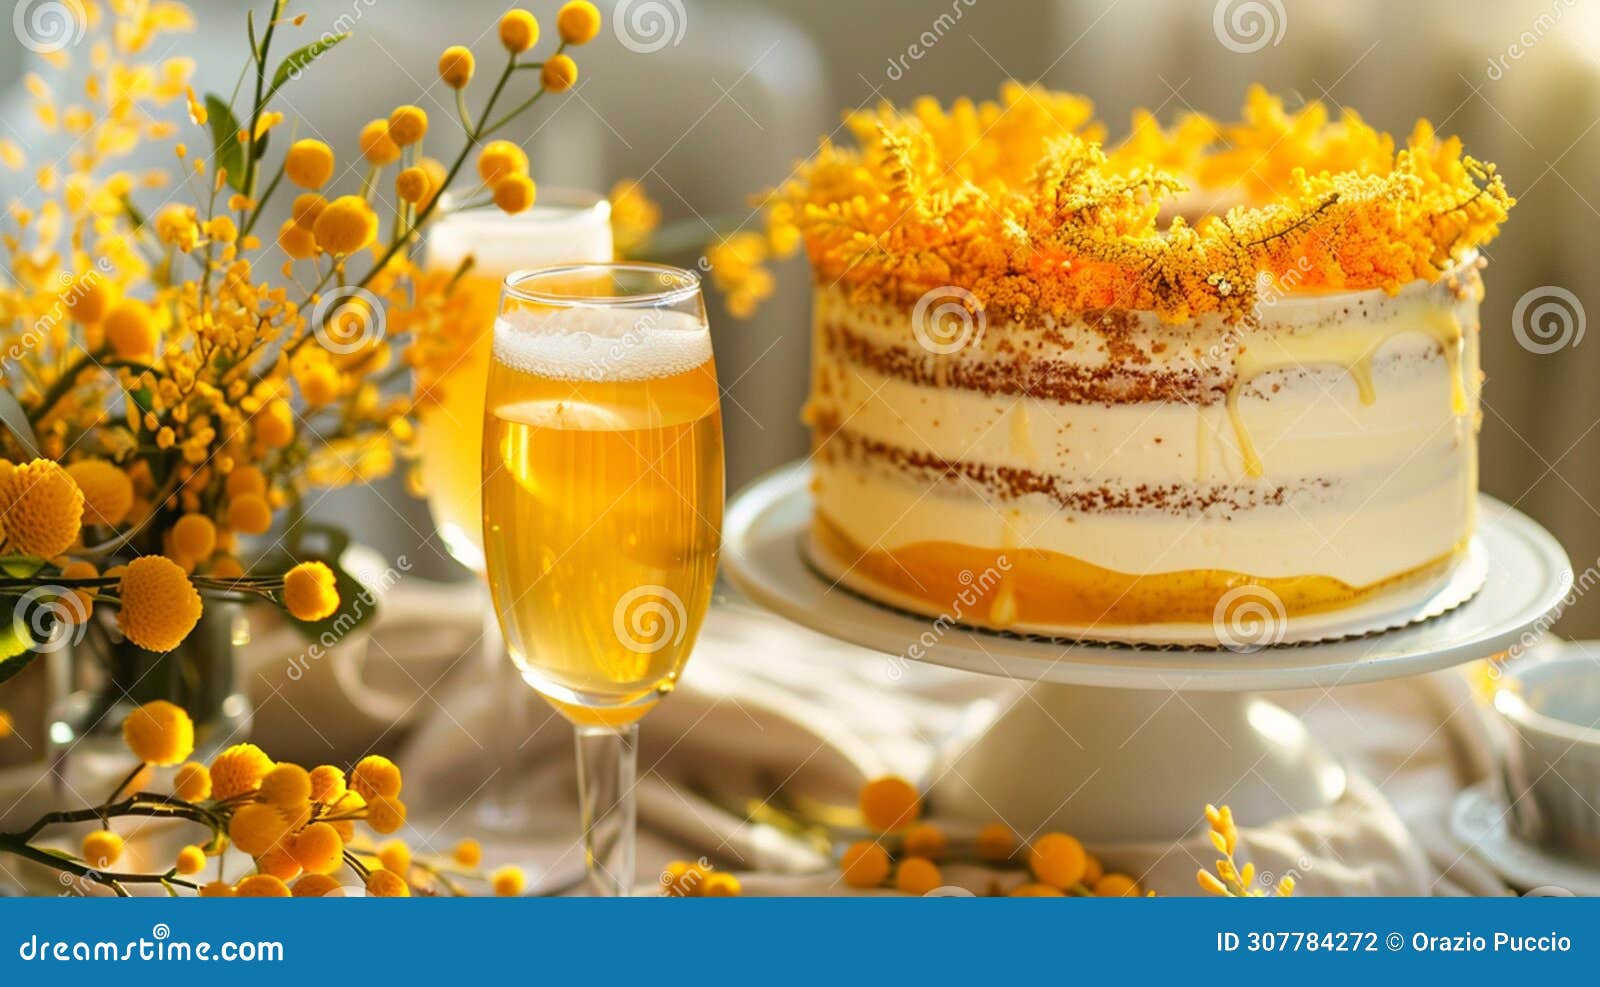 feminine taste: mimosa cake, artistic pastry creation for a sweet event